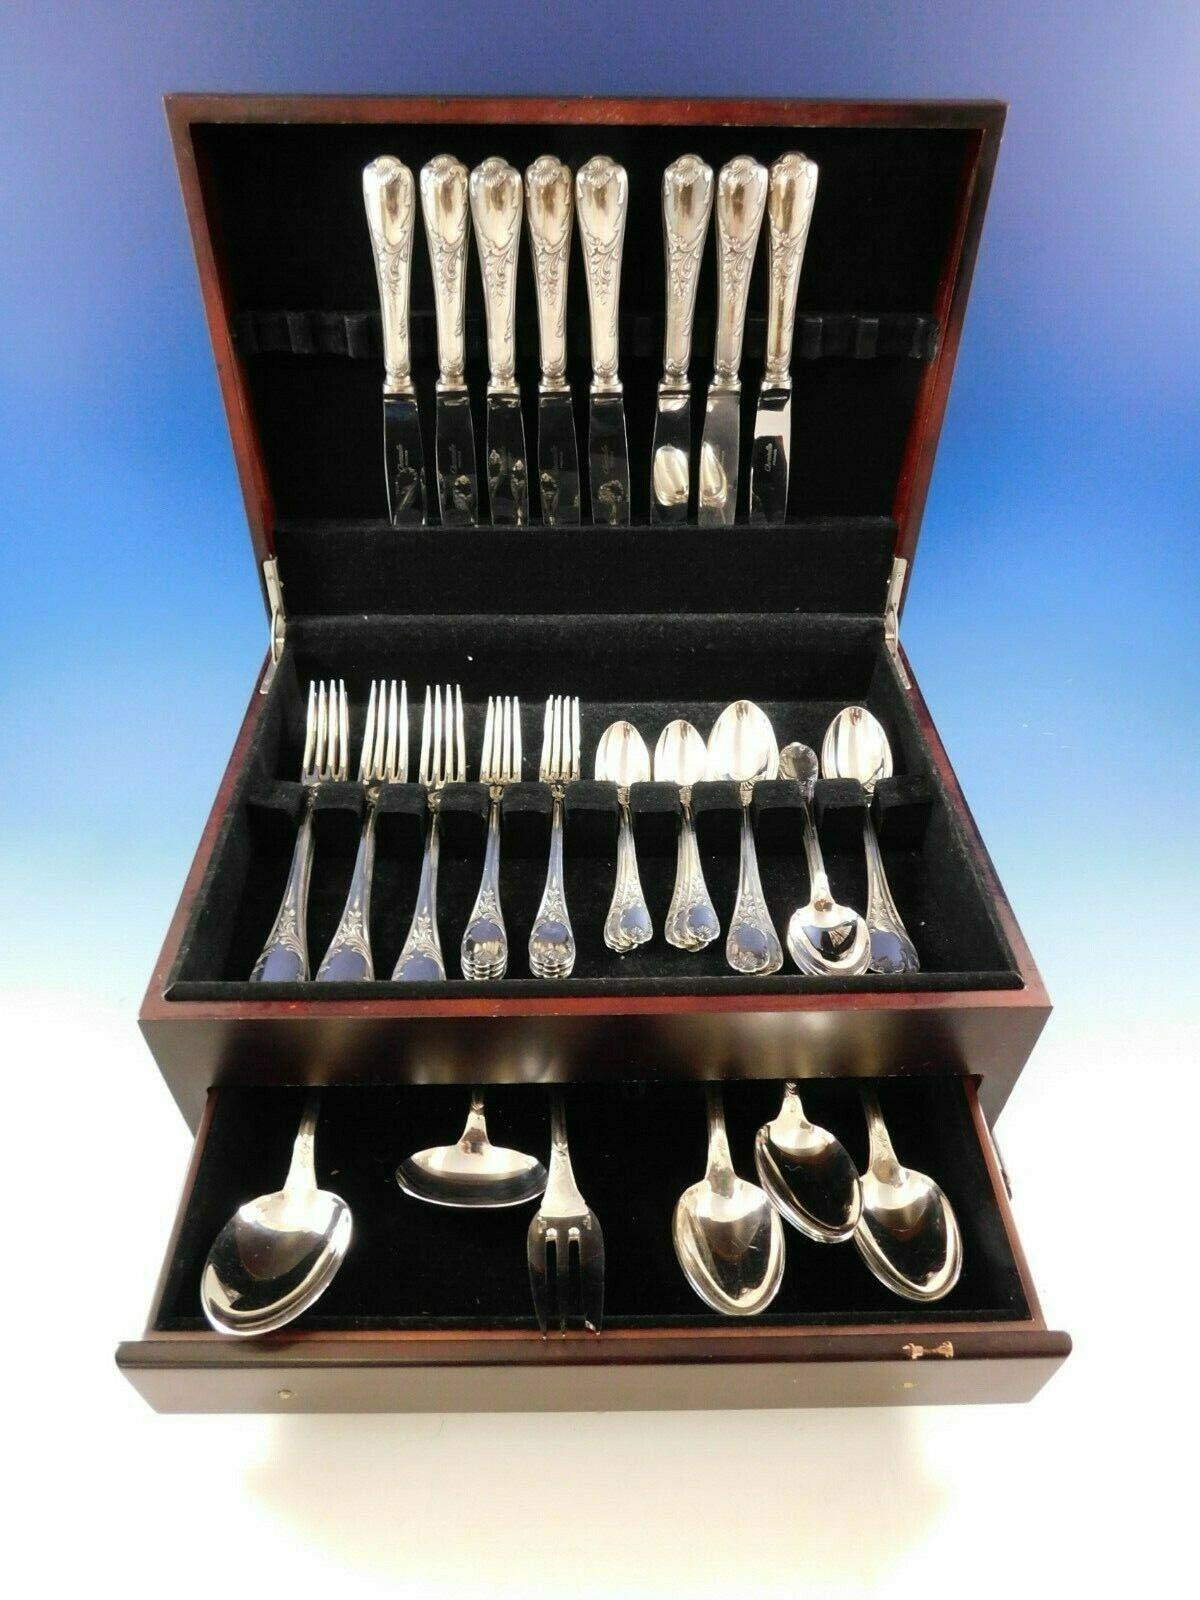 Dinner size Marly by Christofle France silver plate flatware set, 51 pieces. This set includes:

 8 dinner size knives, 9 3/4